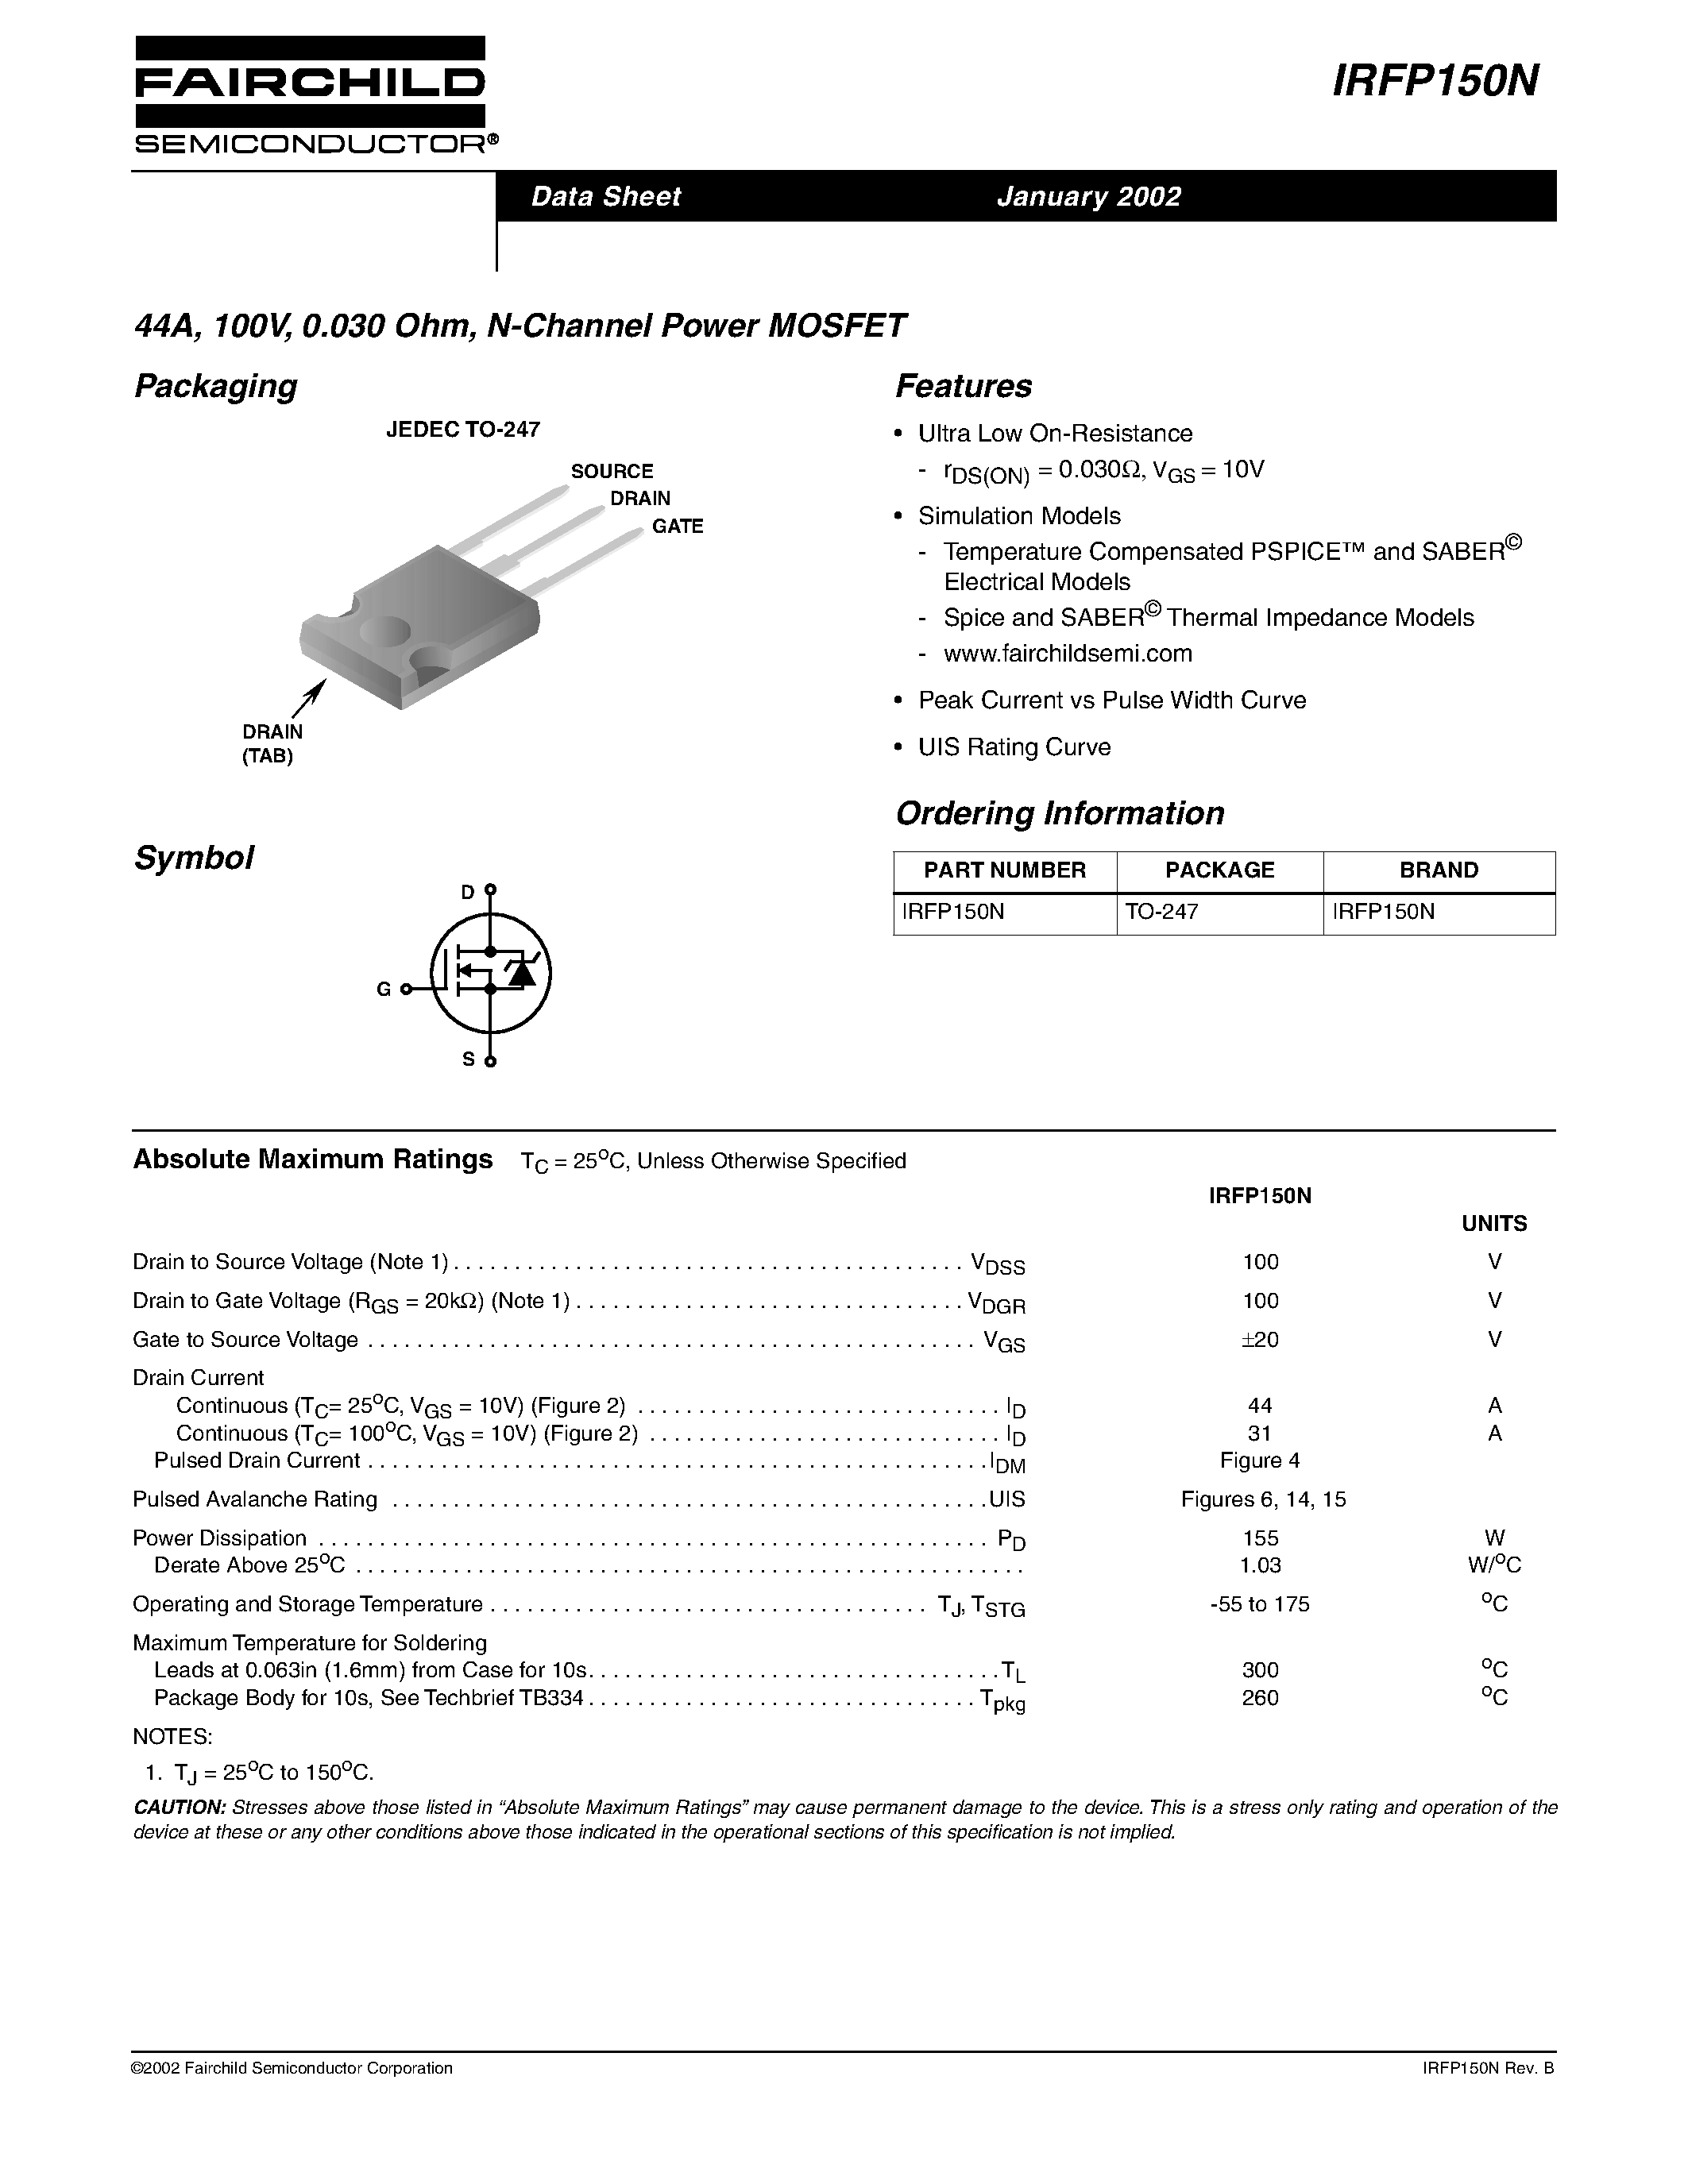 Даташит IRFP150N - N-Channel Power MOSFET страница 1